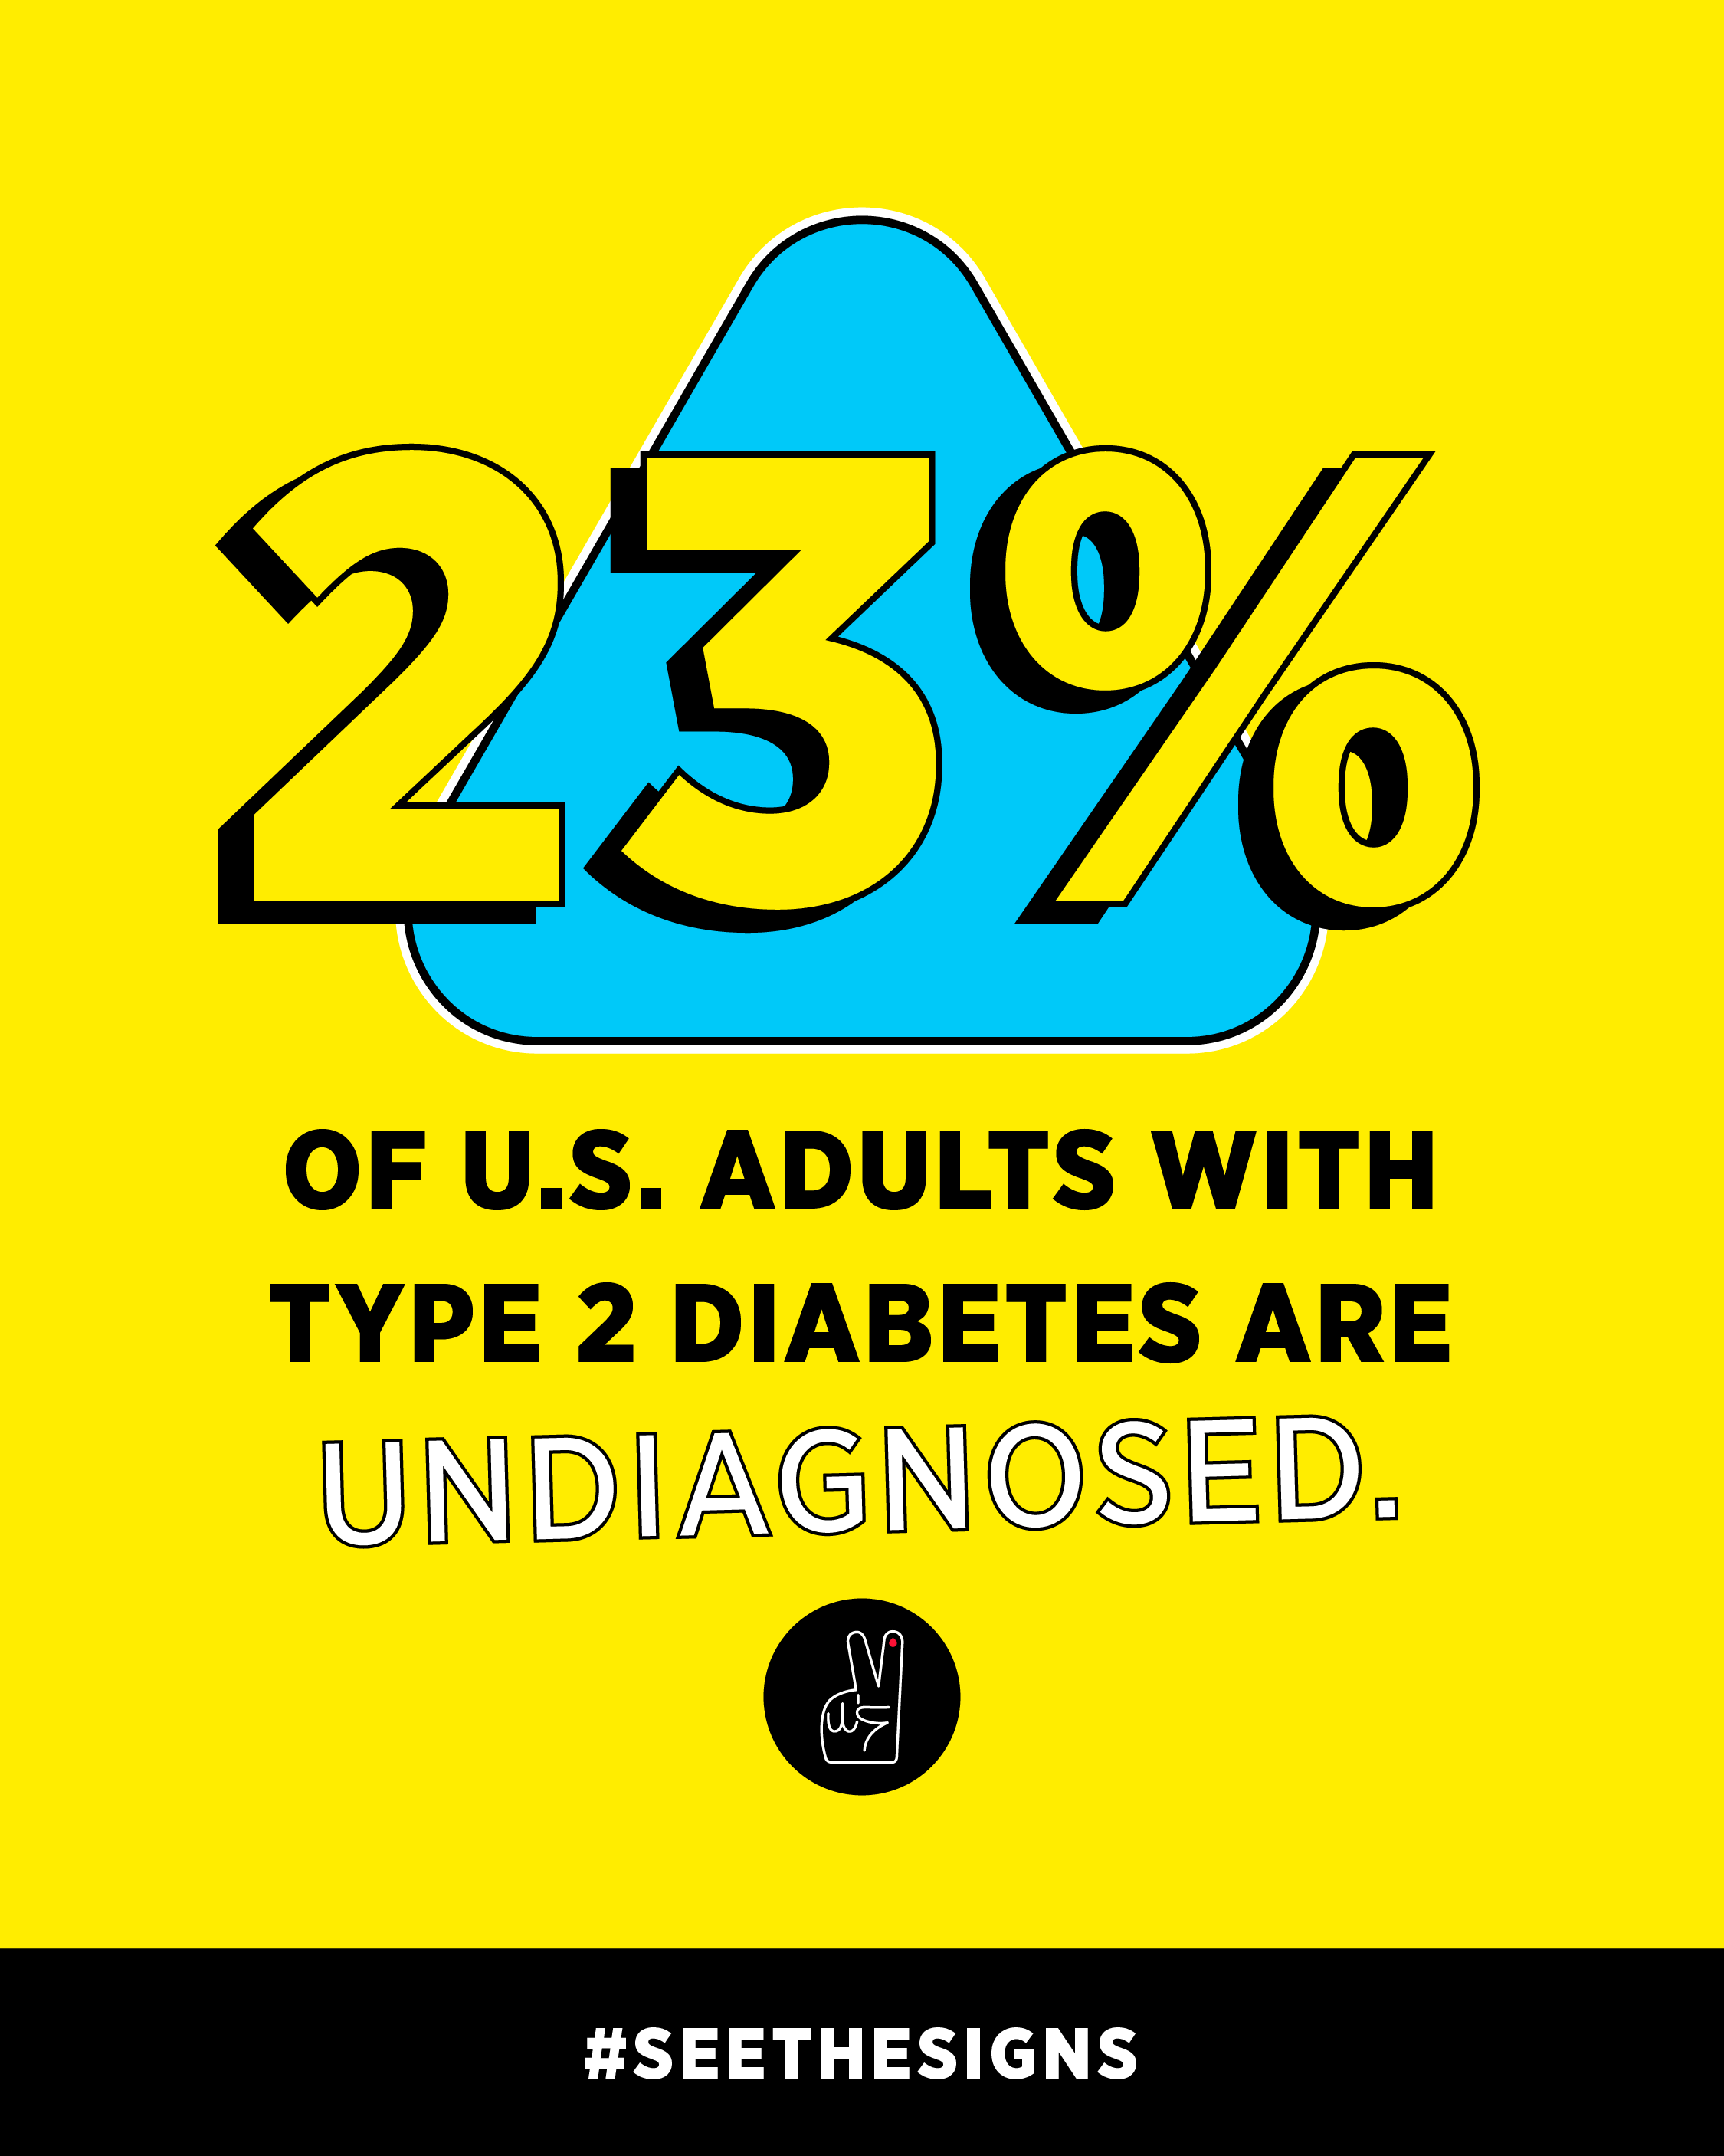 23% of all U.S. adults with type 2 diabetes are undiagnosed